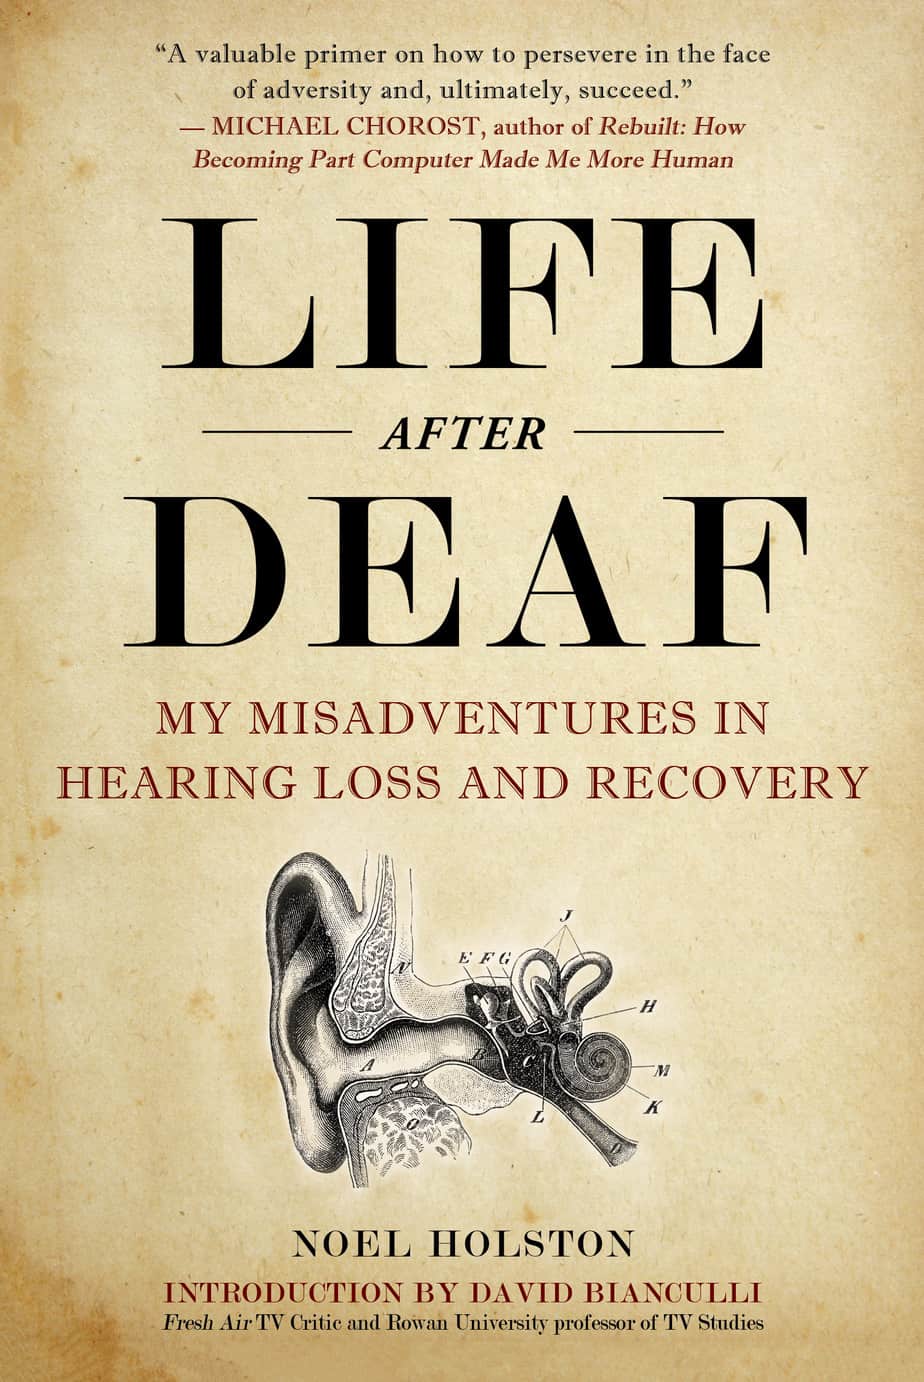 Noel's, who has sudden hearing loss, book cover